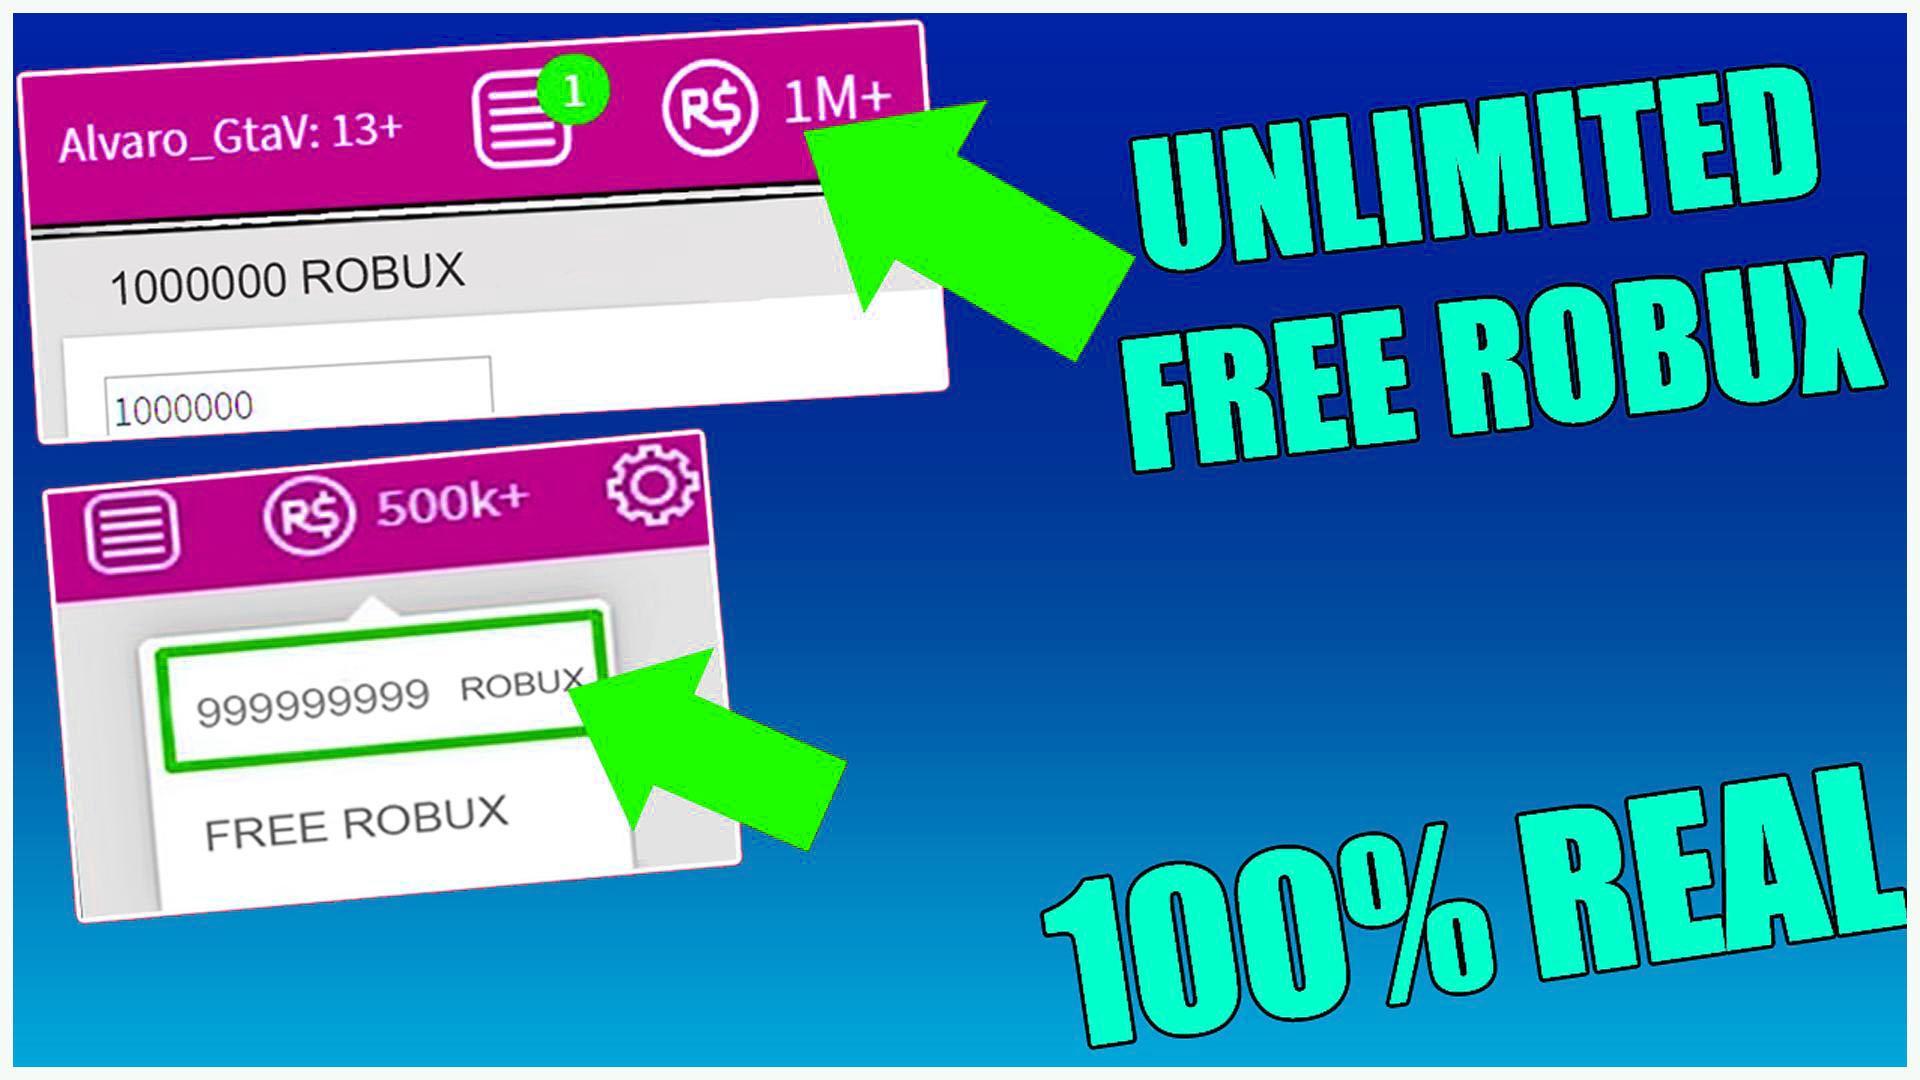 Free Robux New Tips 2020 For Android Apk Download - 1m robux 2020